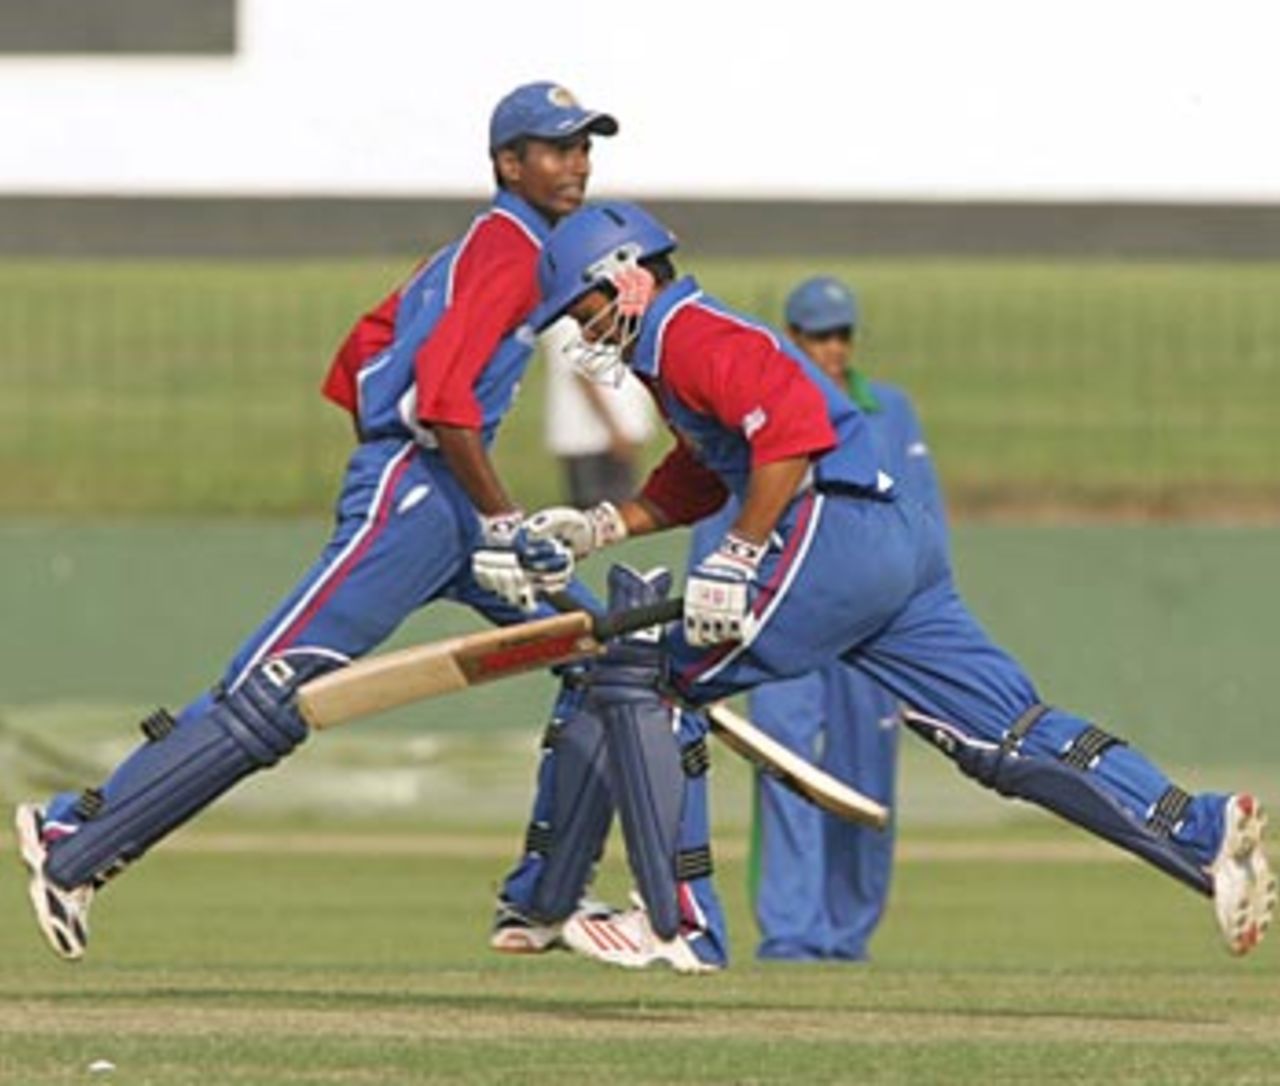 Mrunal Patel (left) and Nisarg Patel (right) complete another run during the USAs successful run-chase against Namibia in the Plate Championship QF match in the ICC U/19 Cricket World Cup in Colombo, Sri Lanka on Tuesday.  The USA won the match by two wickets, their first-ever win in the tournament. February 14, 2005